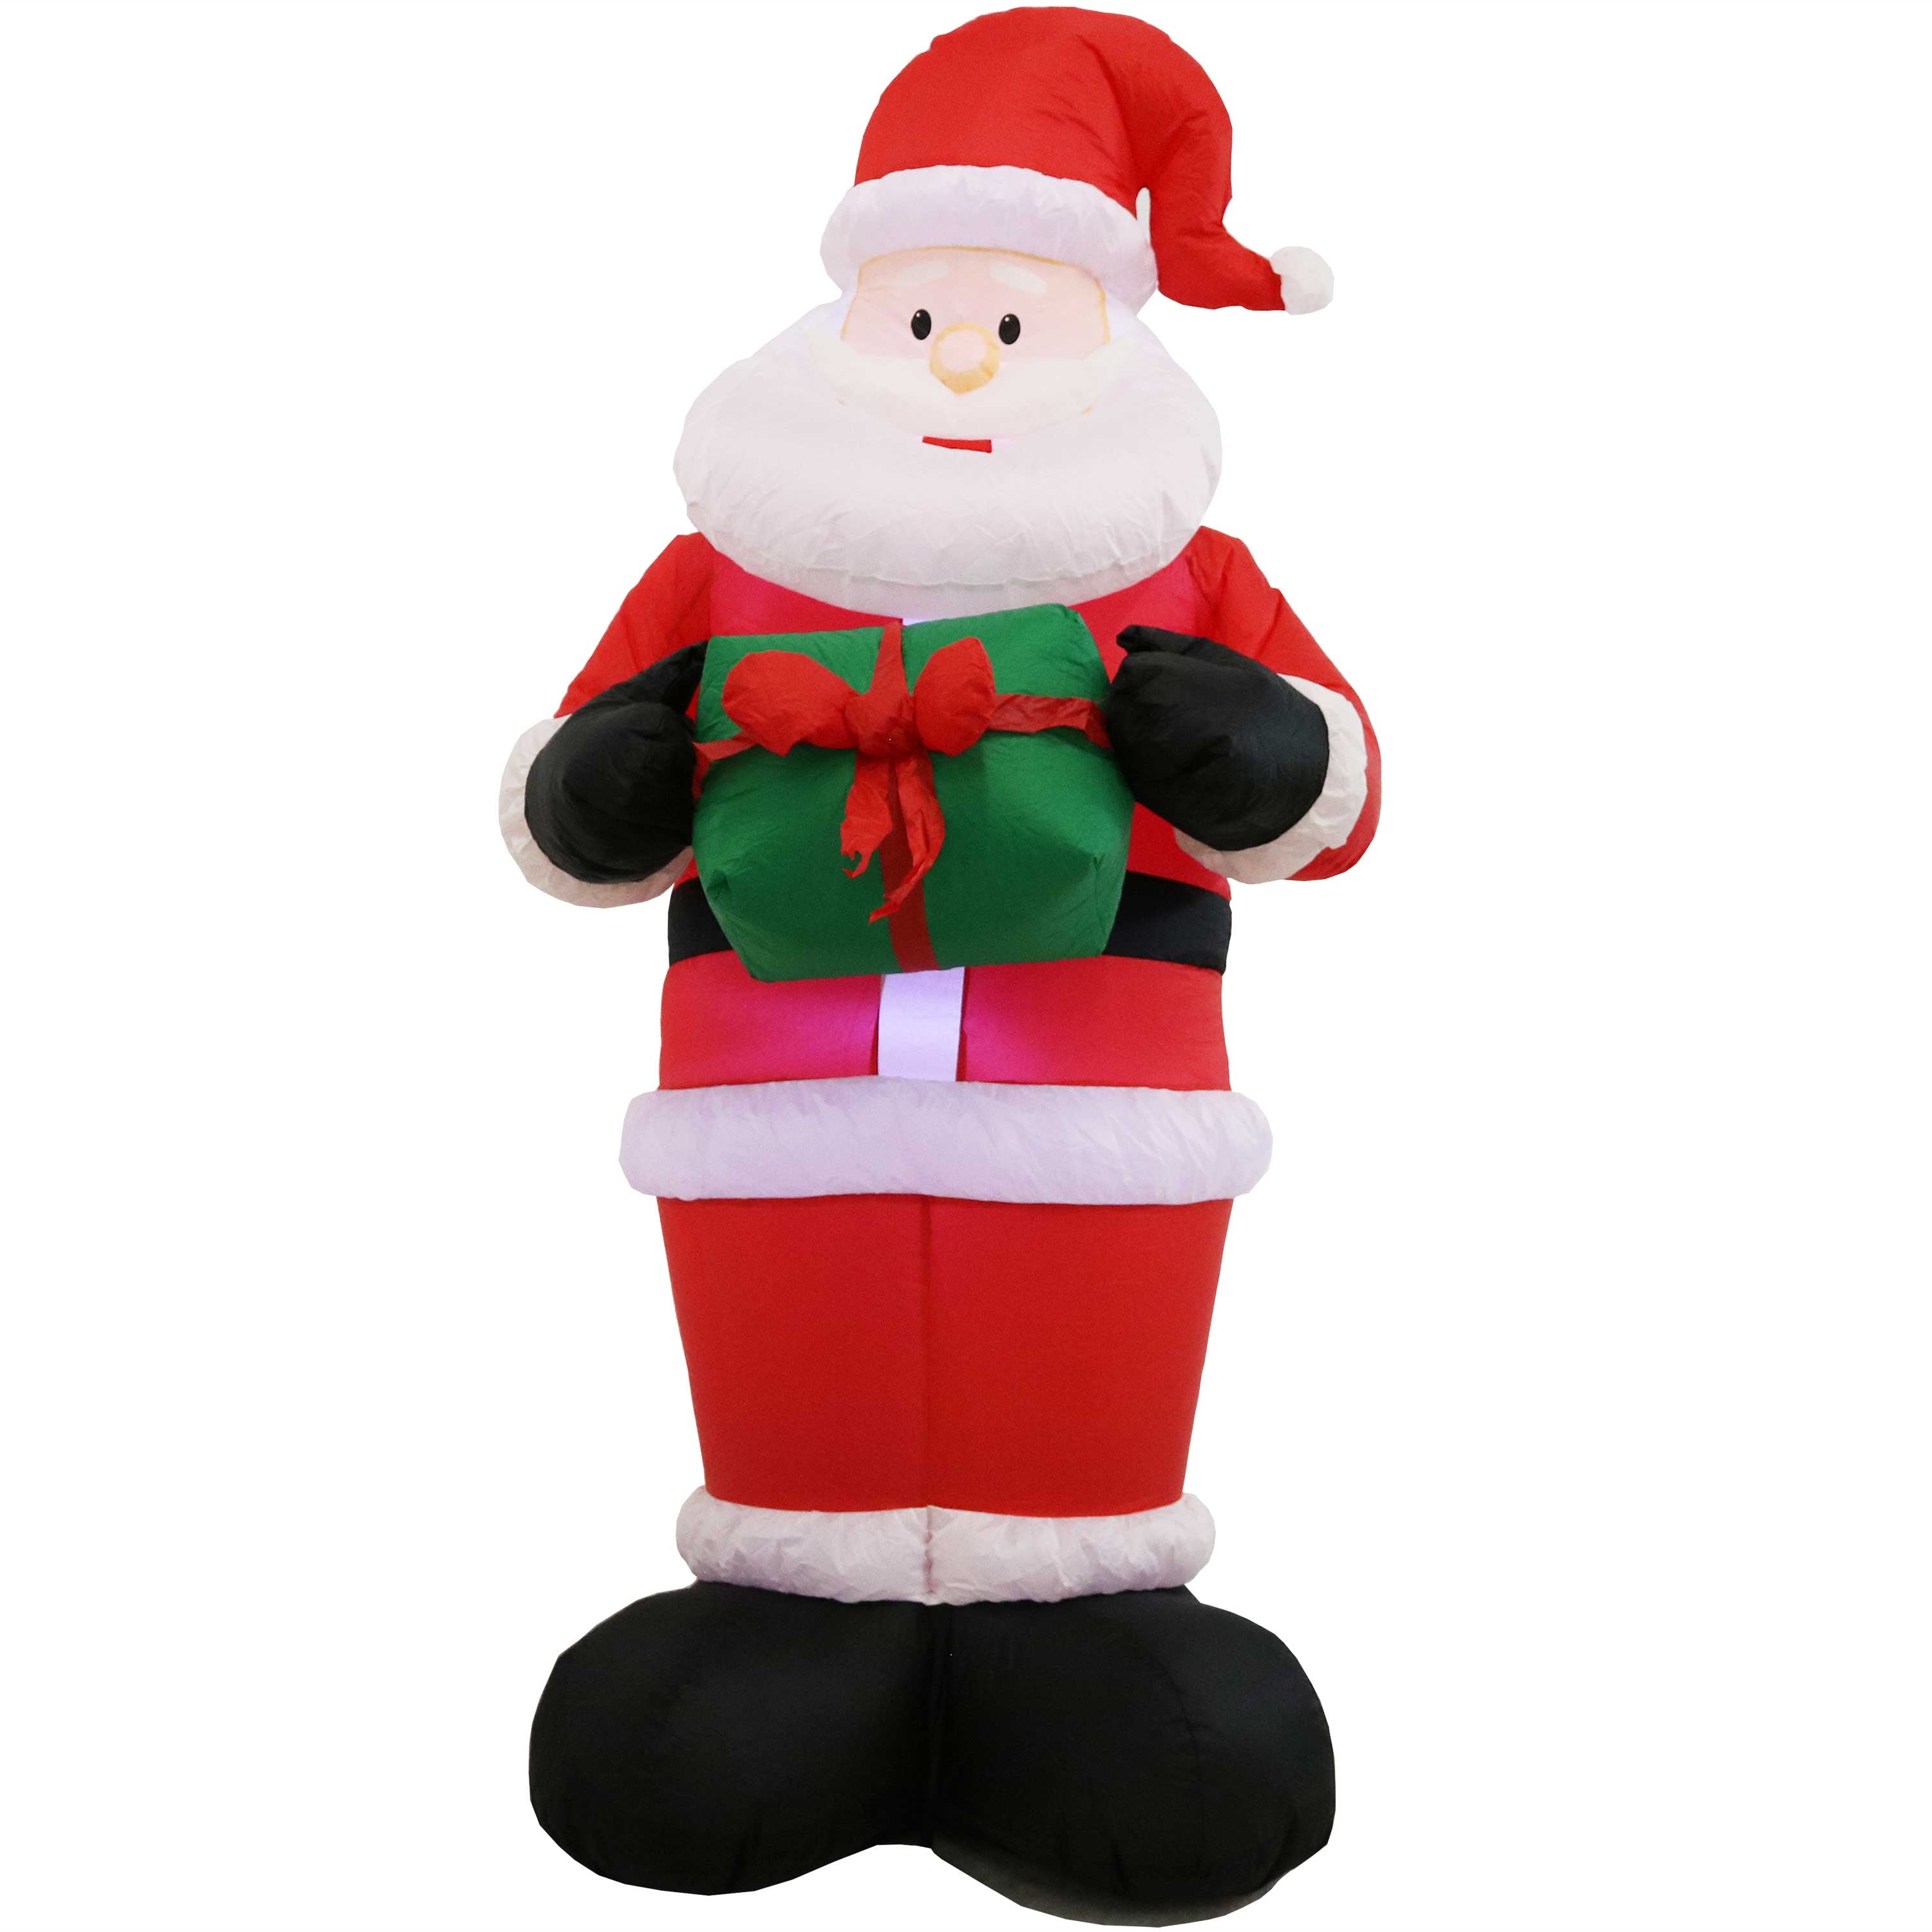 6 Feet Christmas Inflatable Blue Vest Snowman Home Decorations Yard Led Lights Outdoors Ornaments Xmas New Year Party Shop Yard Garden Decoration